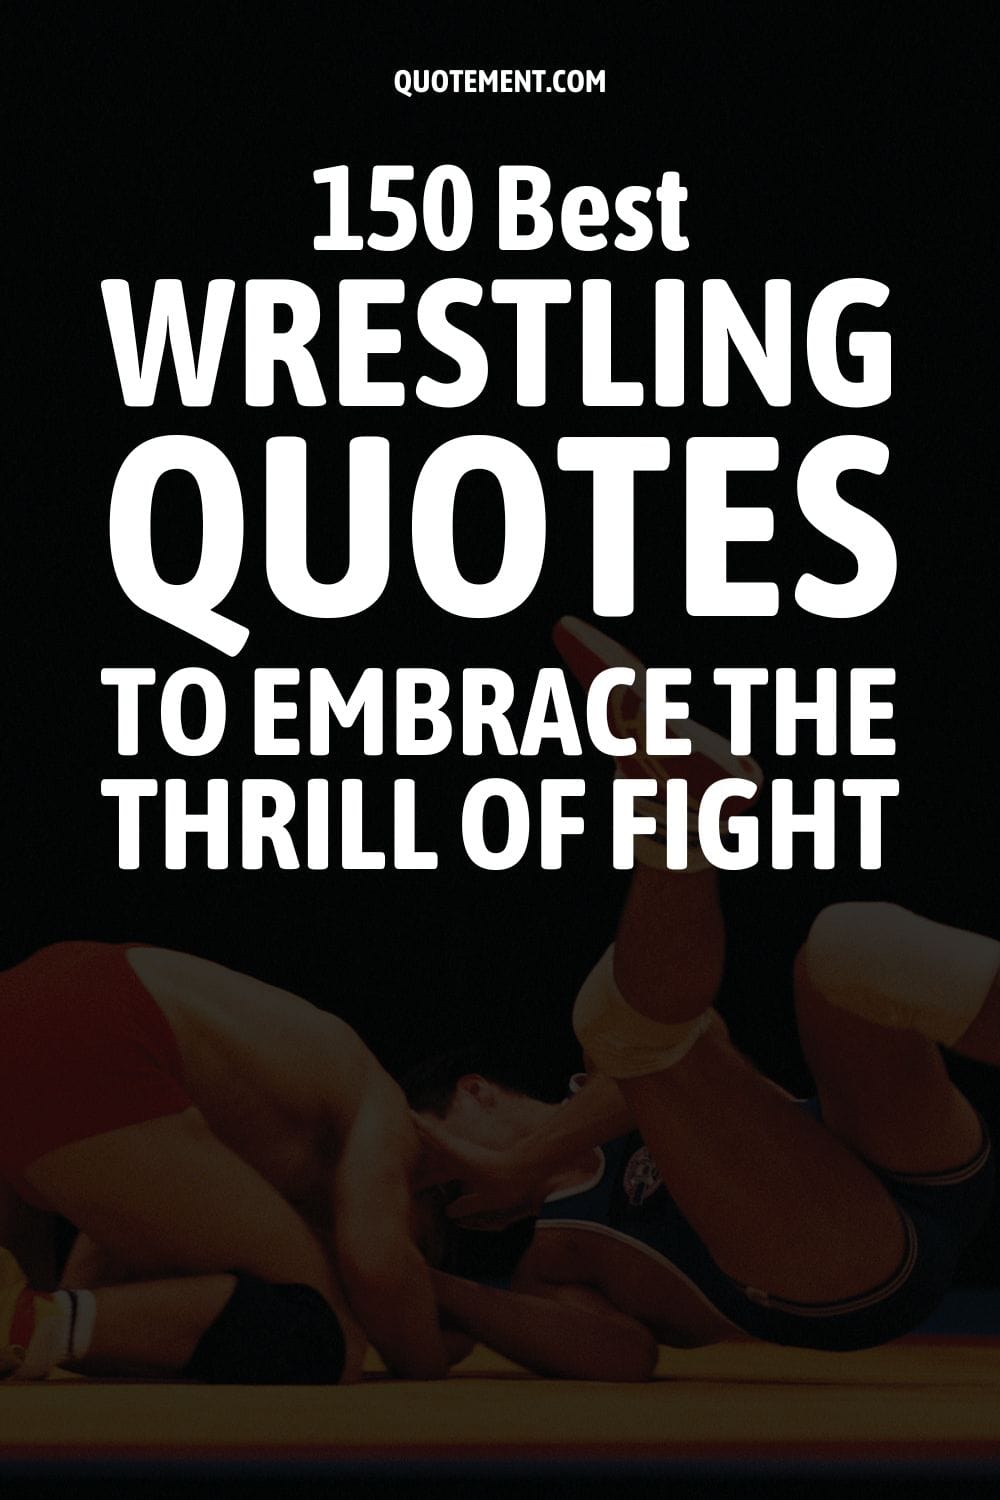 150 Best Wrestling Quotes To Embrace The Thrill Of Fight